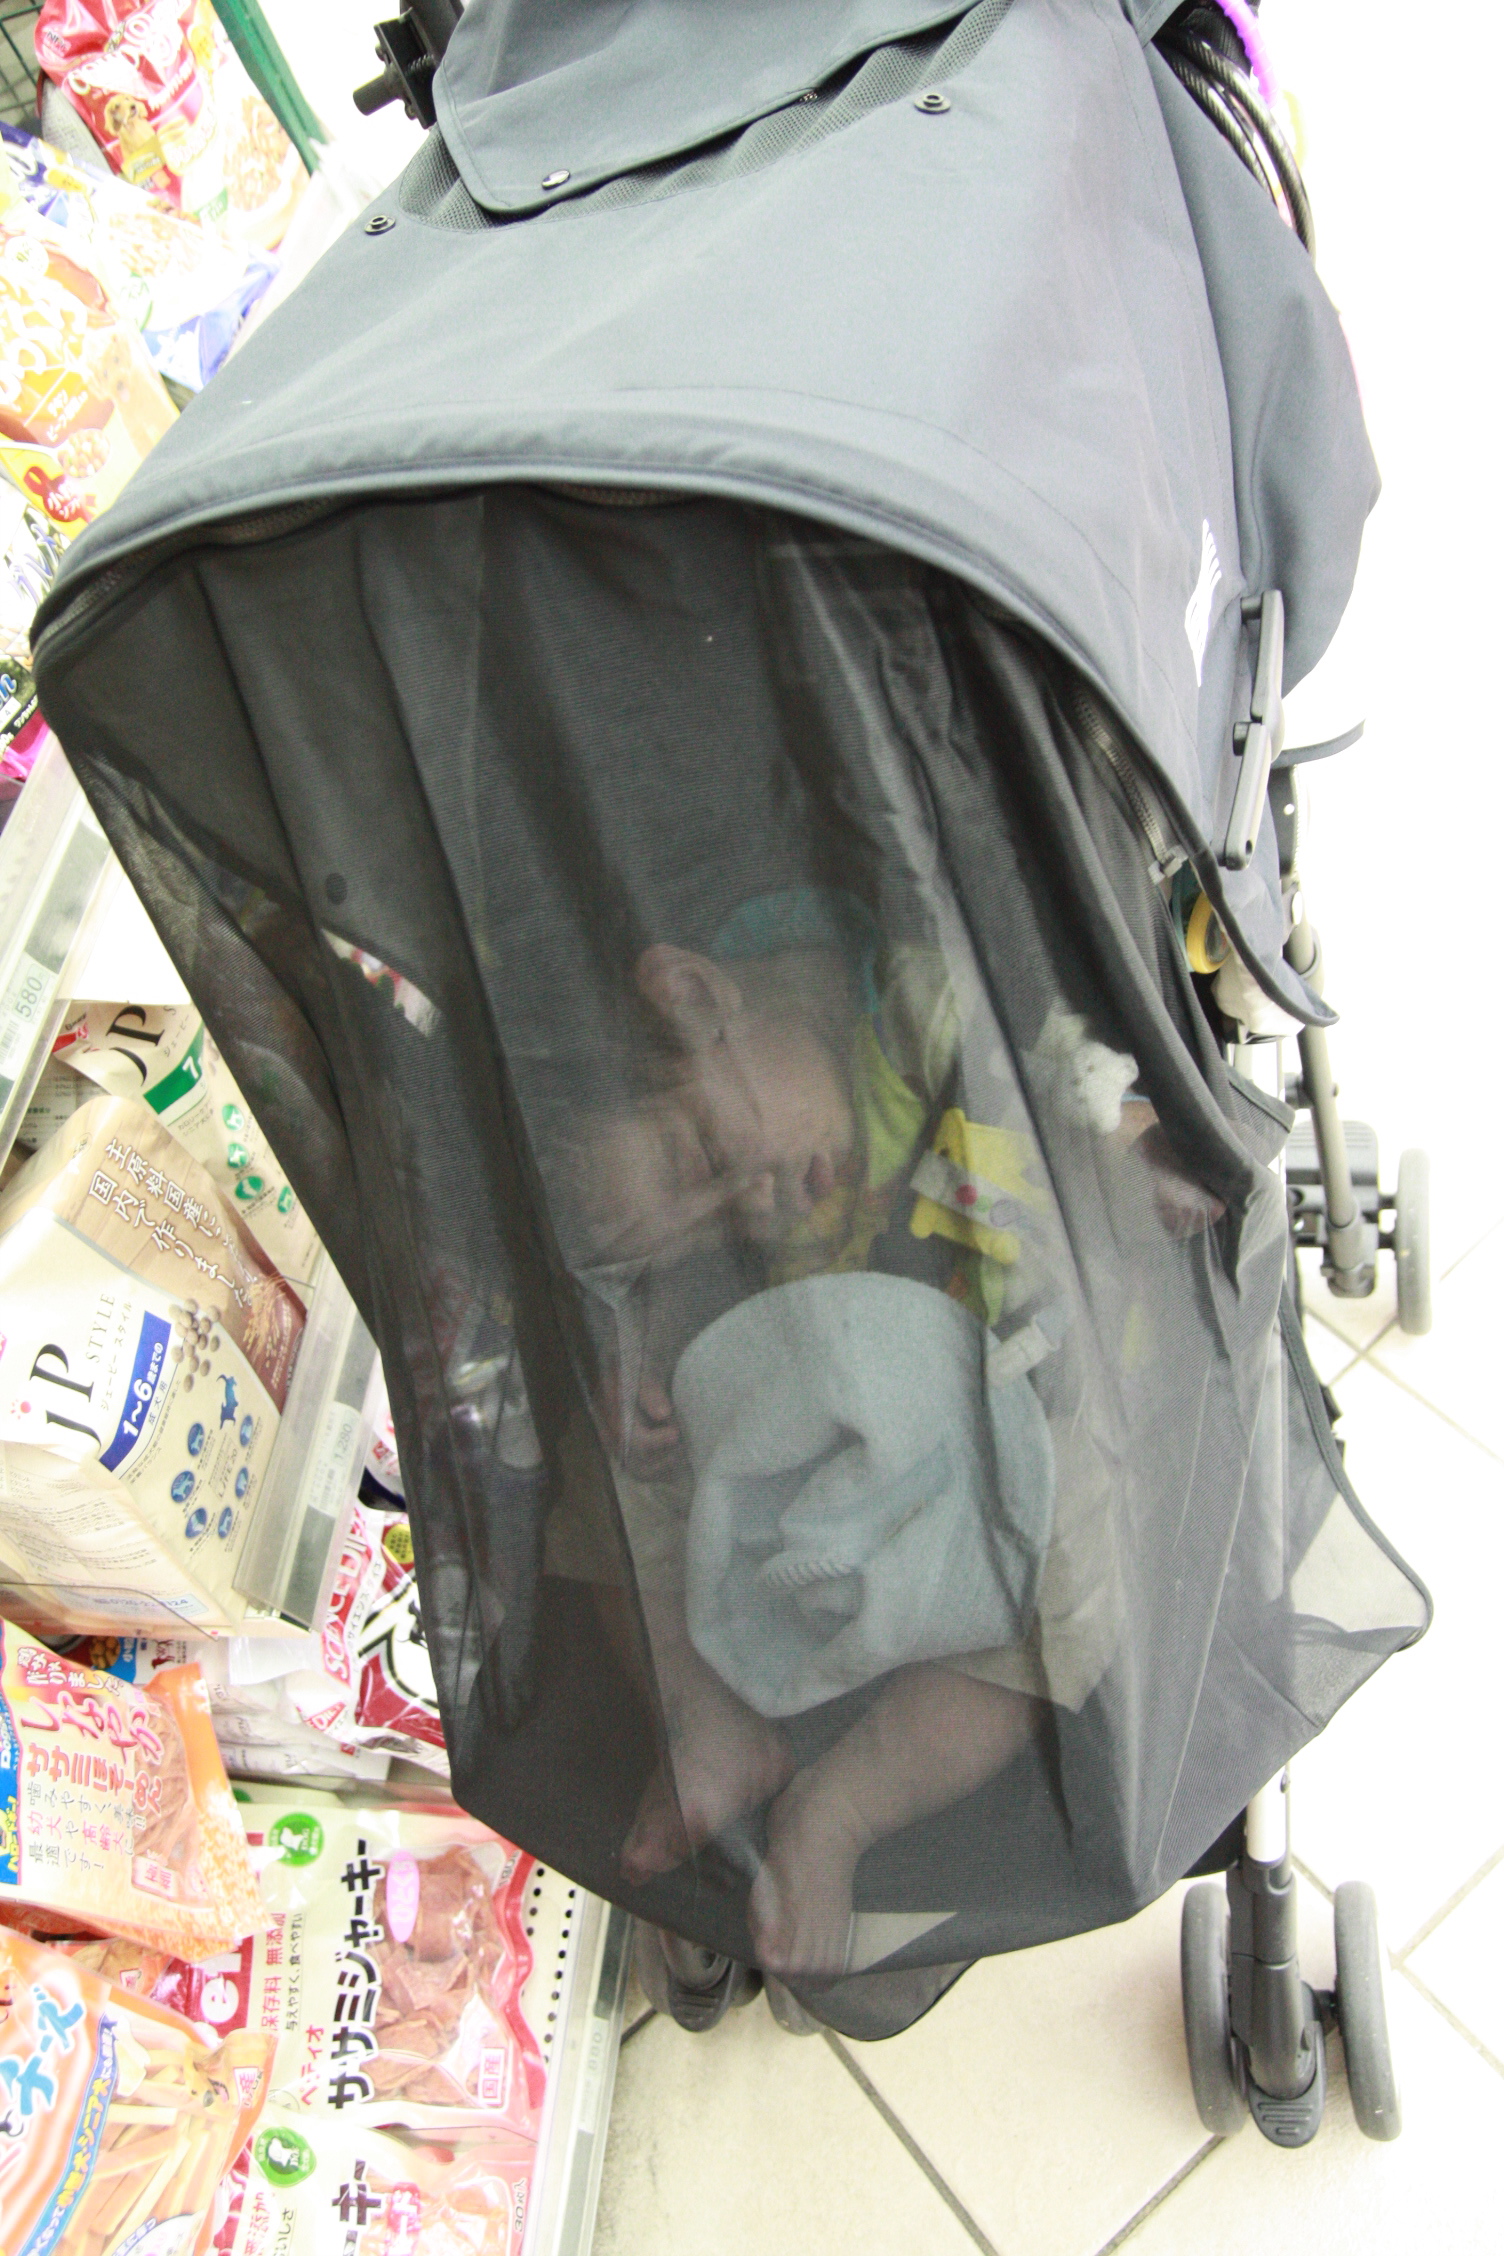 an infant in a stroller with snacks on the ground